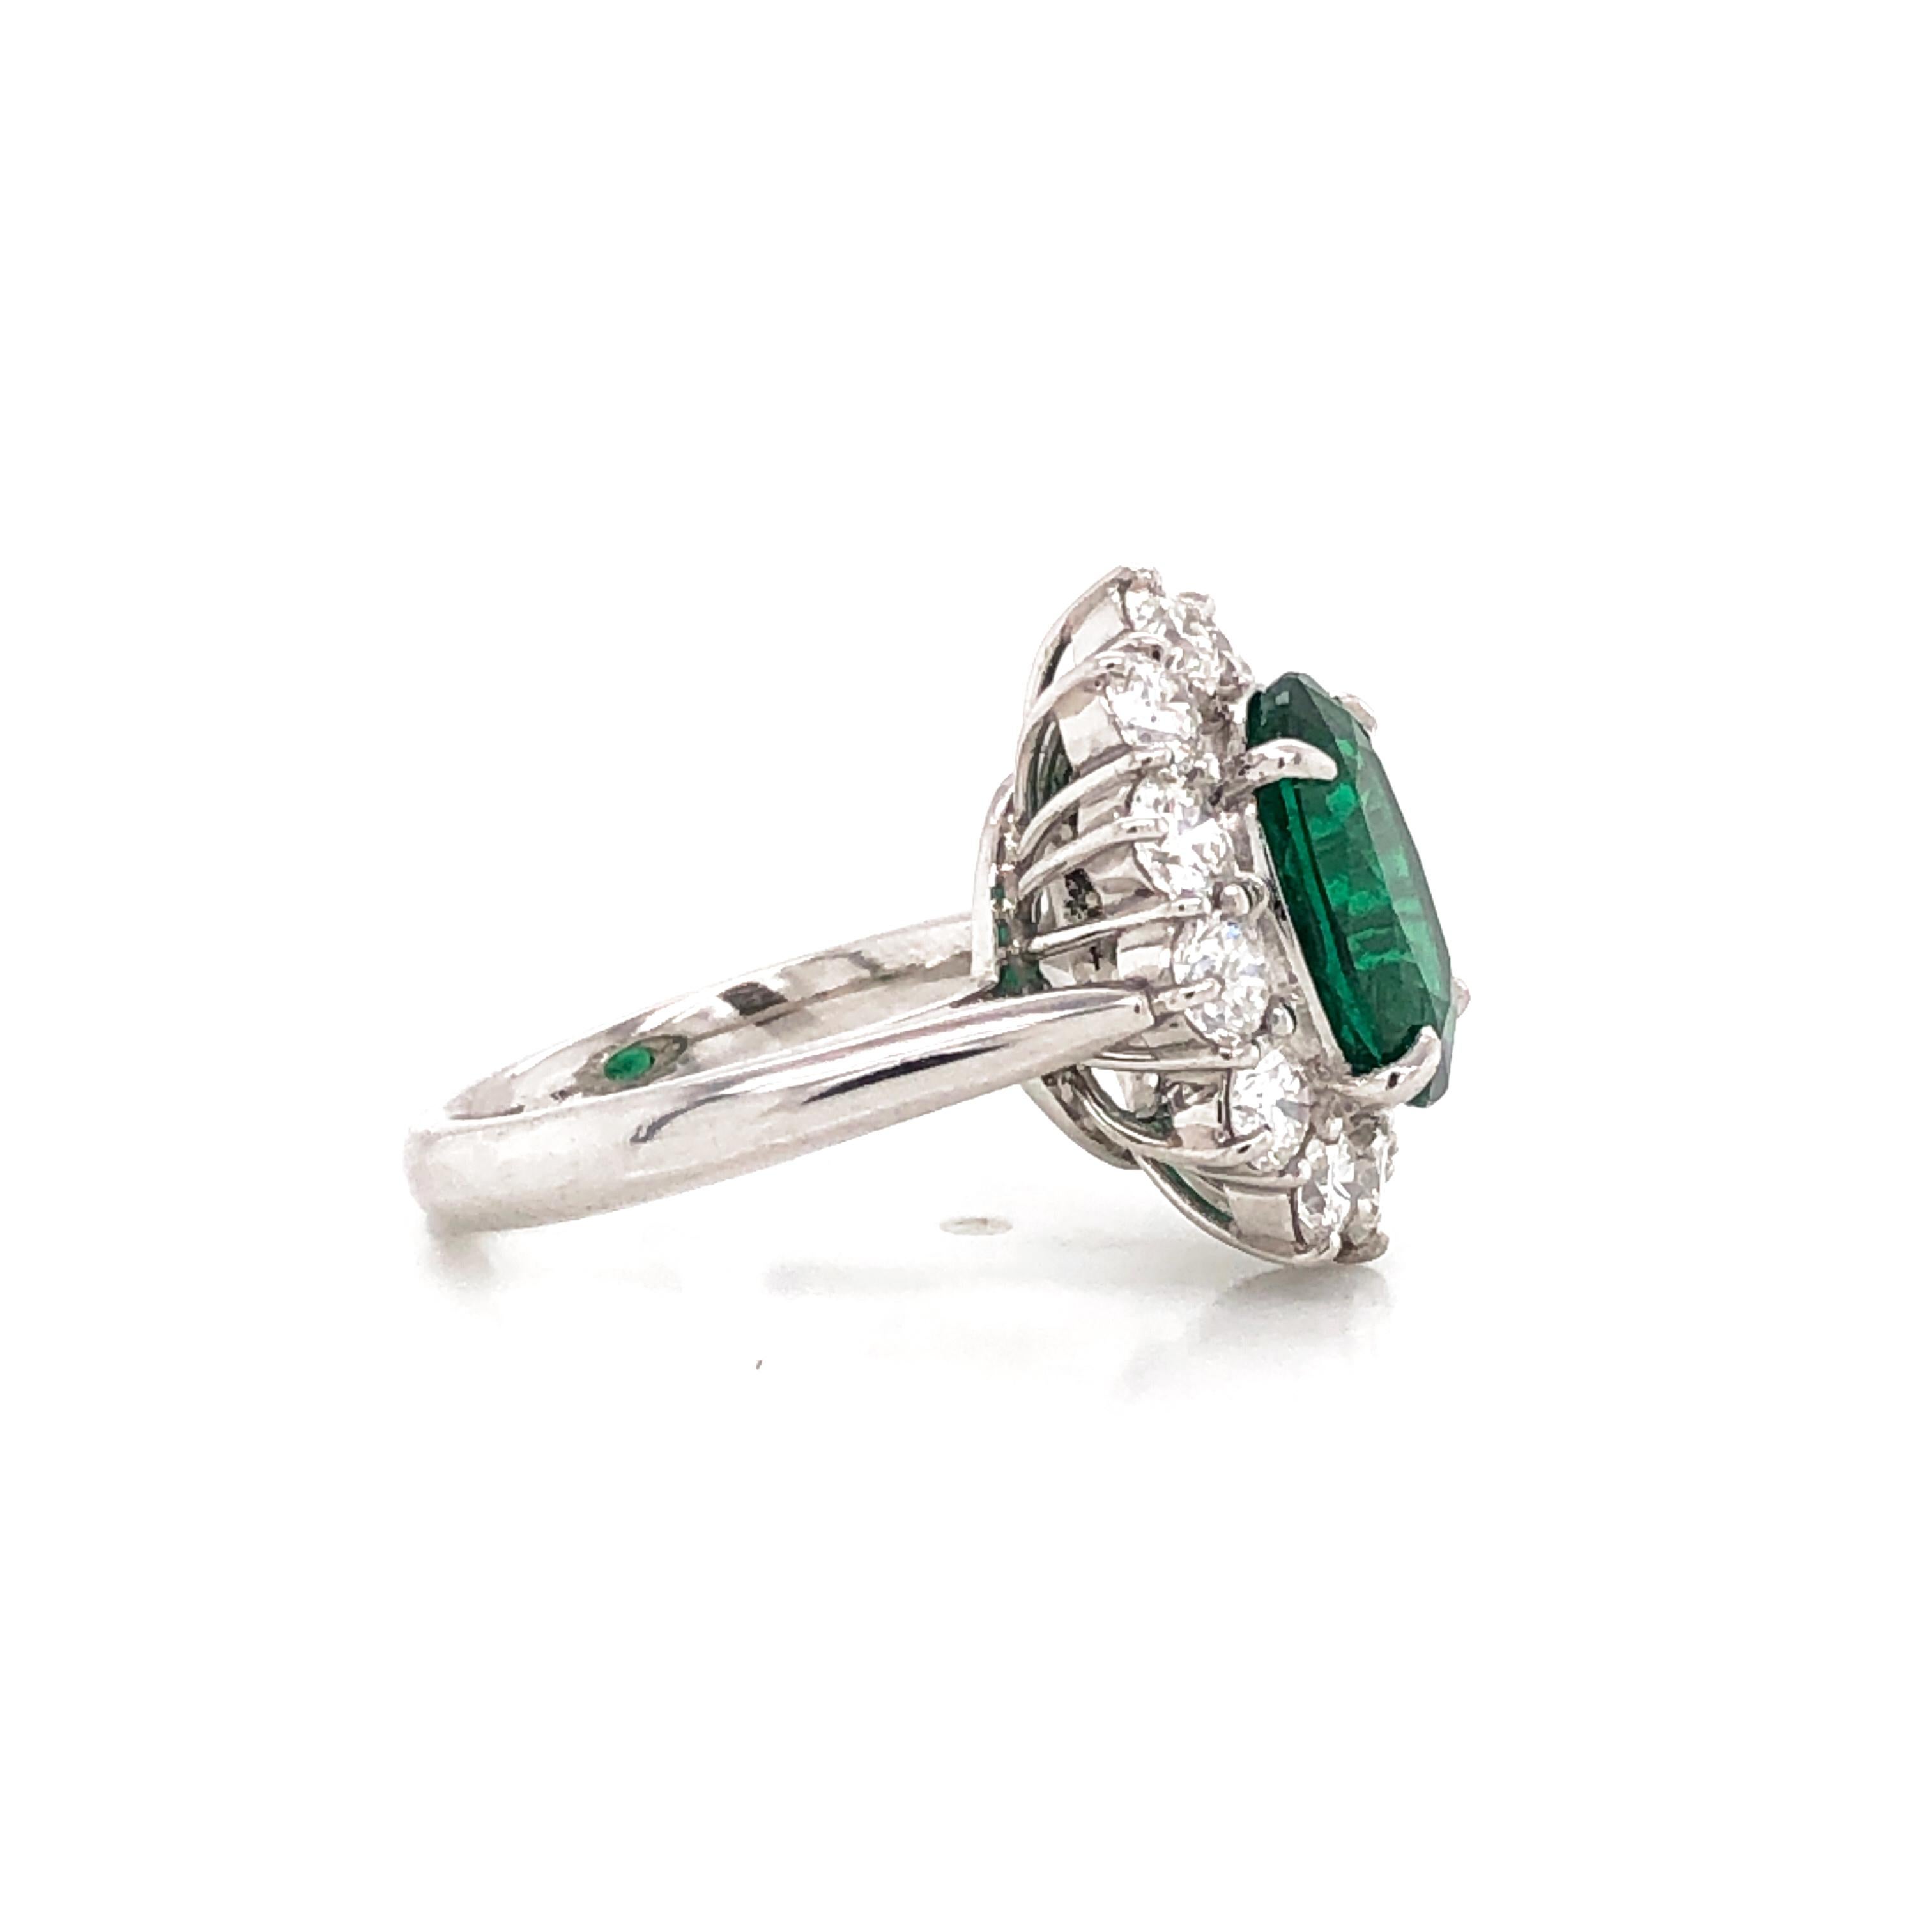 Elegantly styled oval cut green Zambian emerald 3.22 carat center stone.  C. Dunaigre Switzerland Certified emerald. Minor oil treated. Accented by round diamonds 2.03 carat in total.  Diamonds are white and natural and in G-H Color Clarity VS.